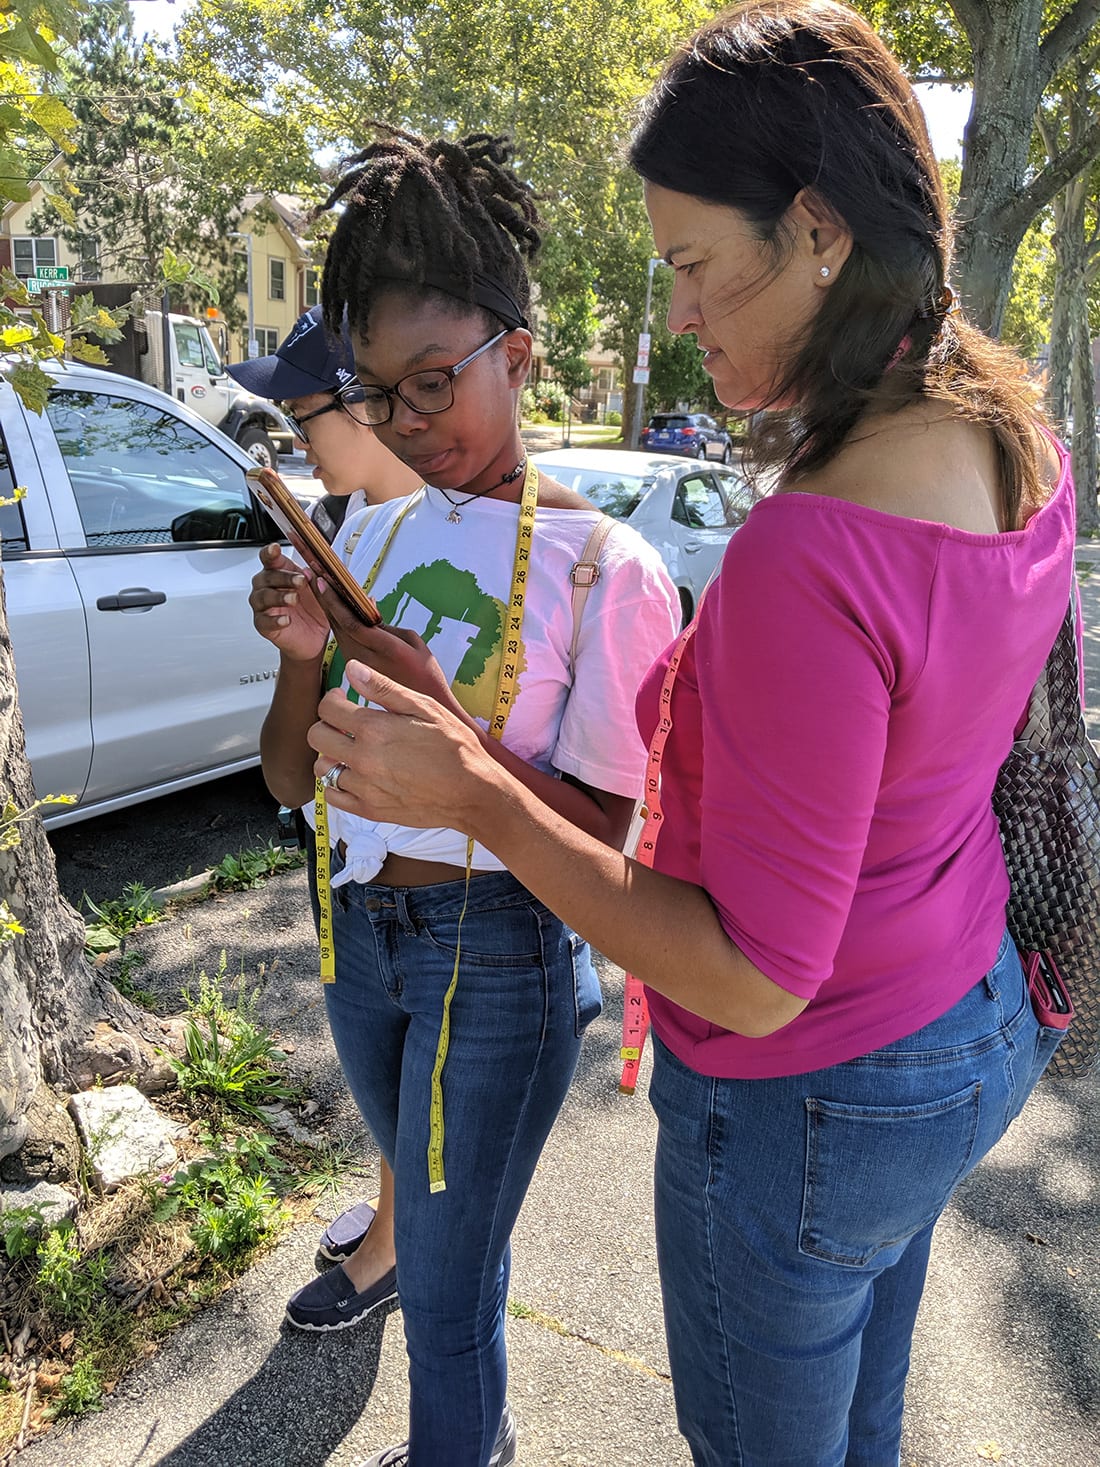 Teen Urban Tree Corps member Maya Hall demonstrates how to input data on a street tree to Boston City Councilor Annissa Essaibi George.